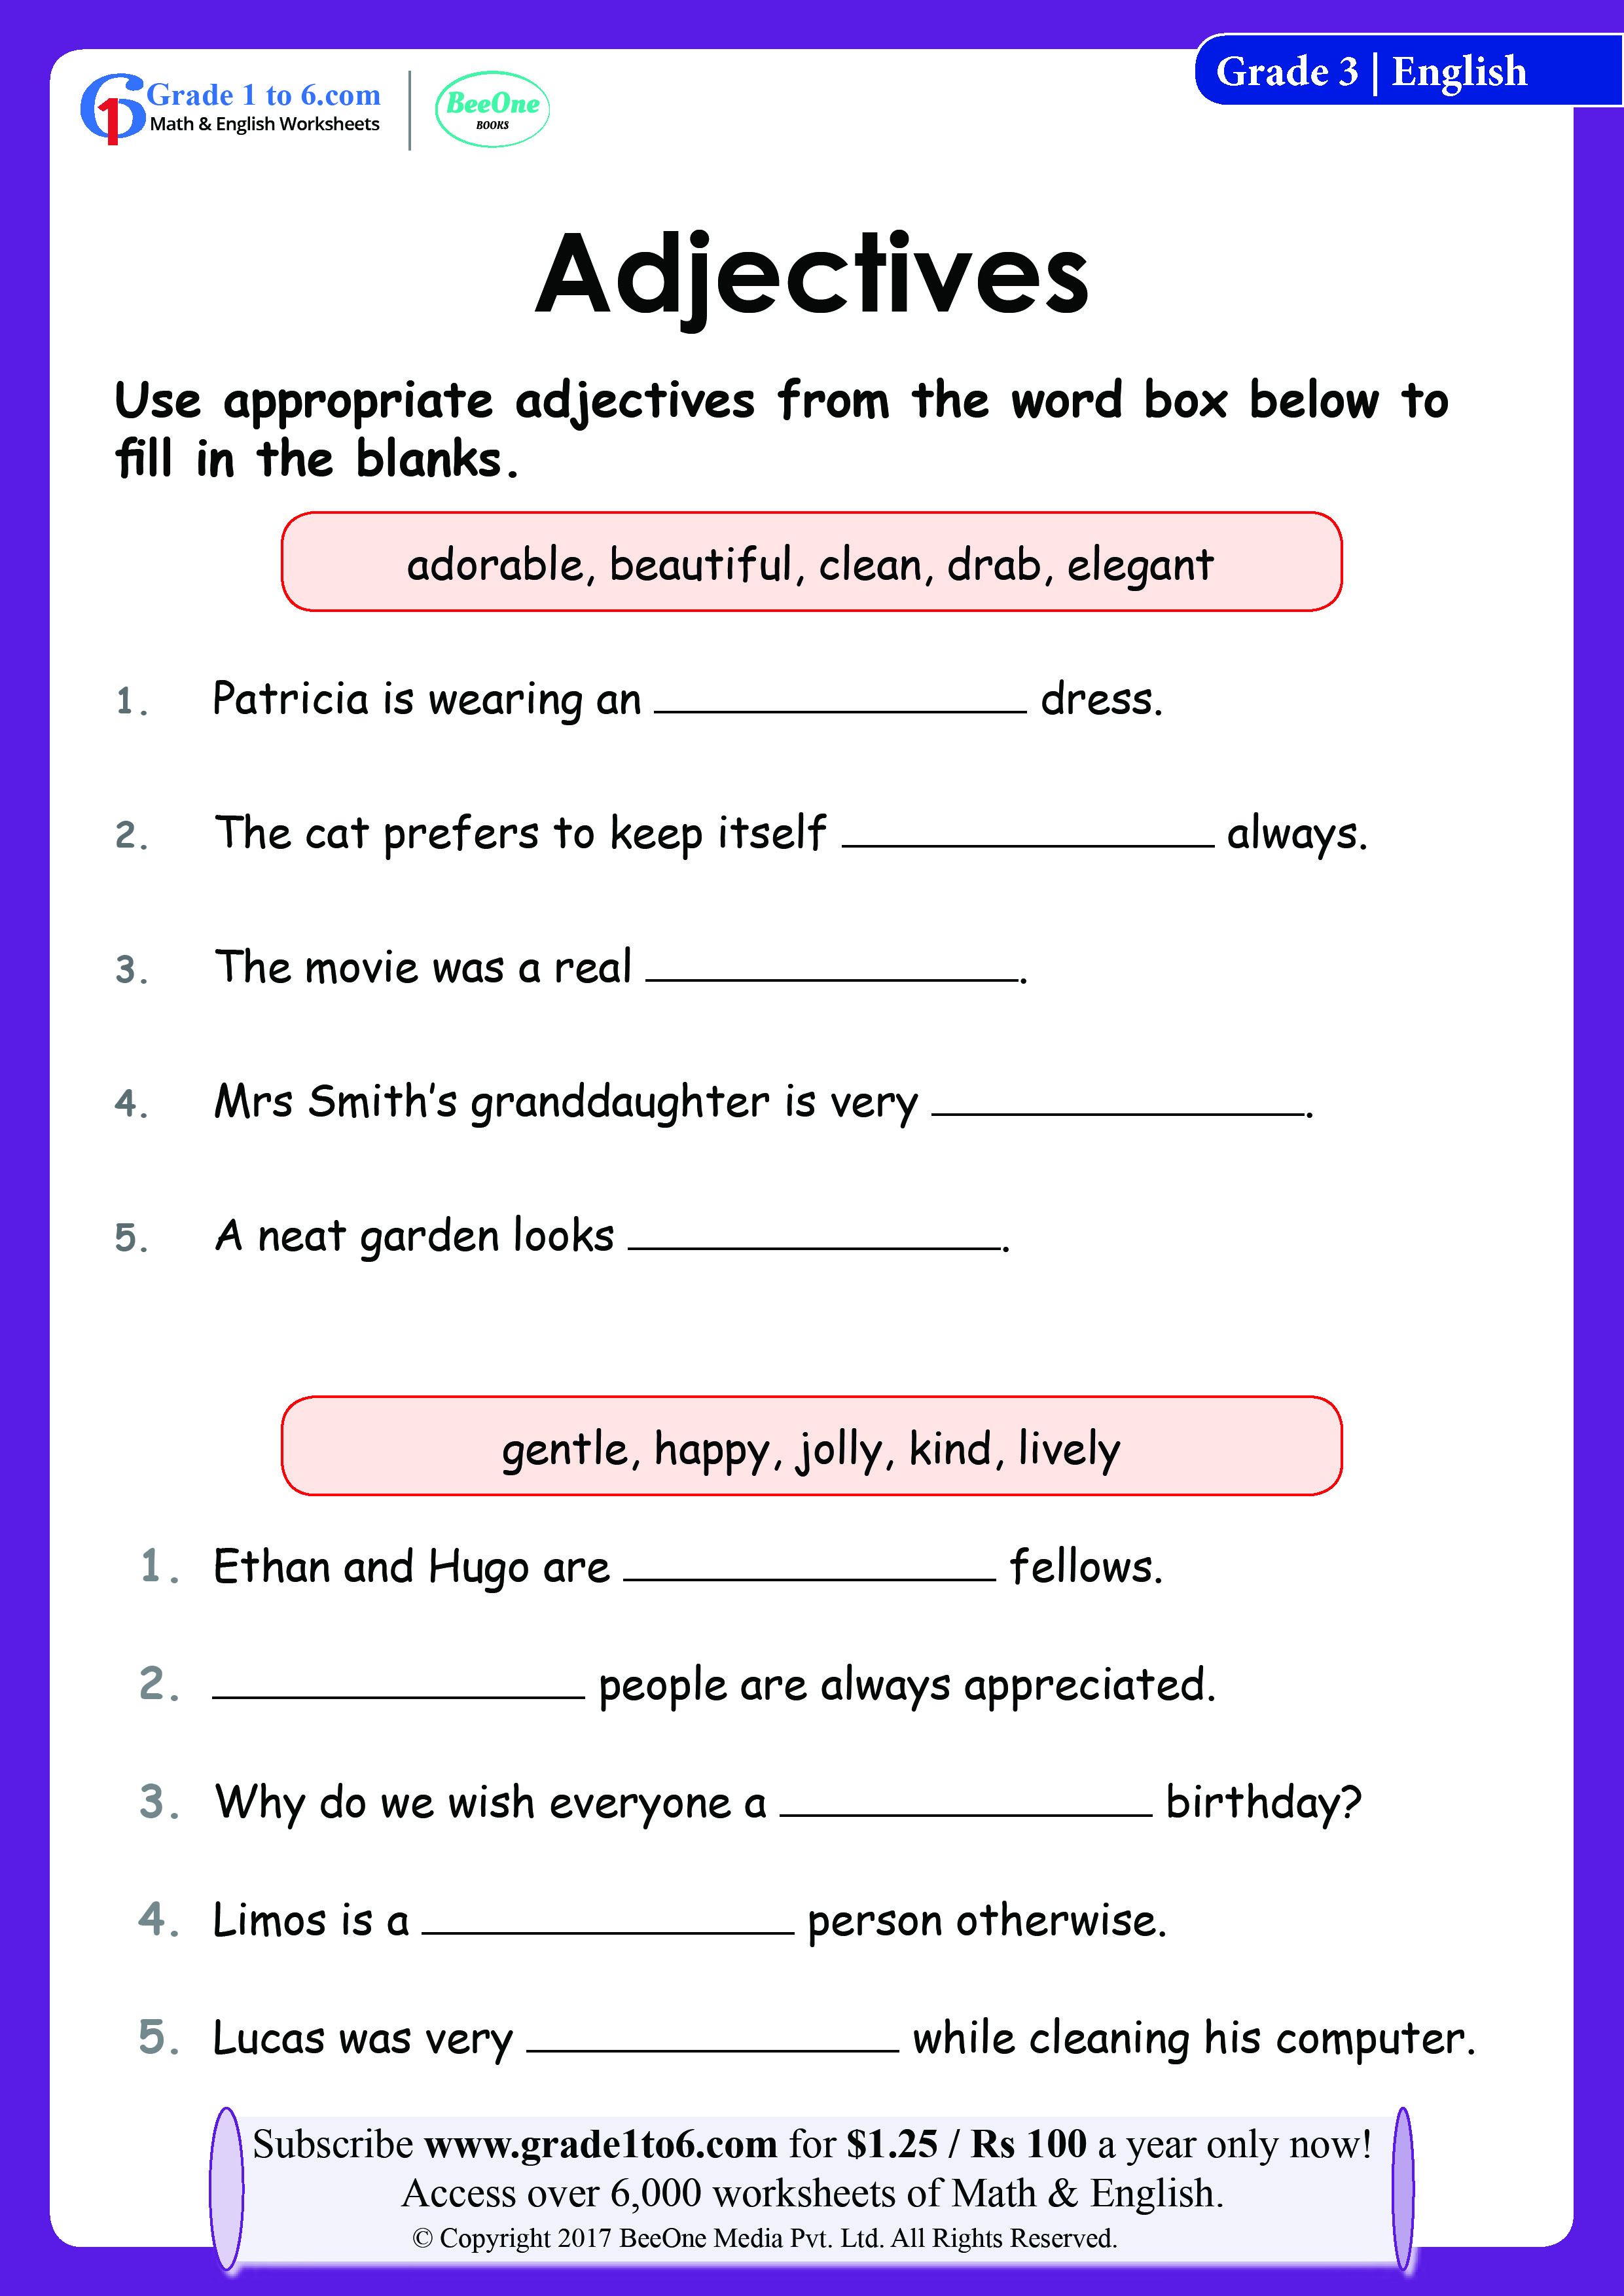 adjectives-and-nouns-worksheets-for-grade-2-k5-learning-grade-2-adjectives-worksheets-k5